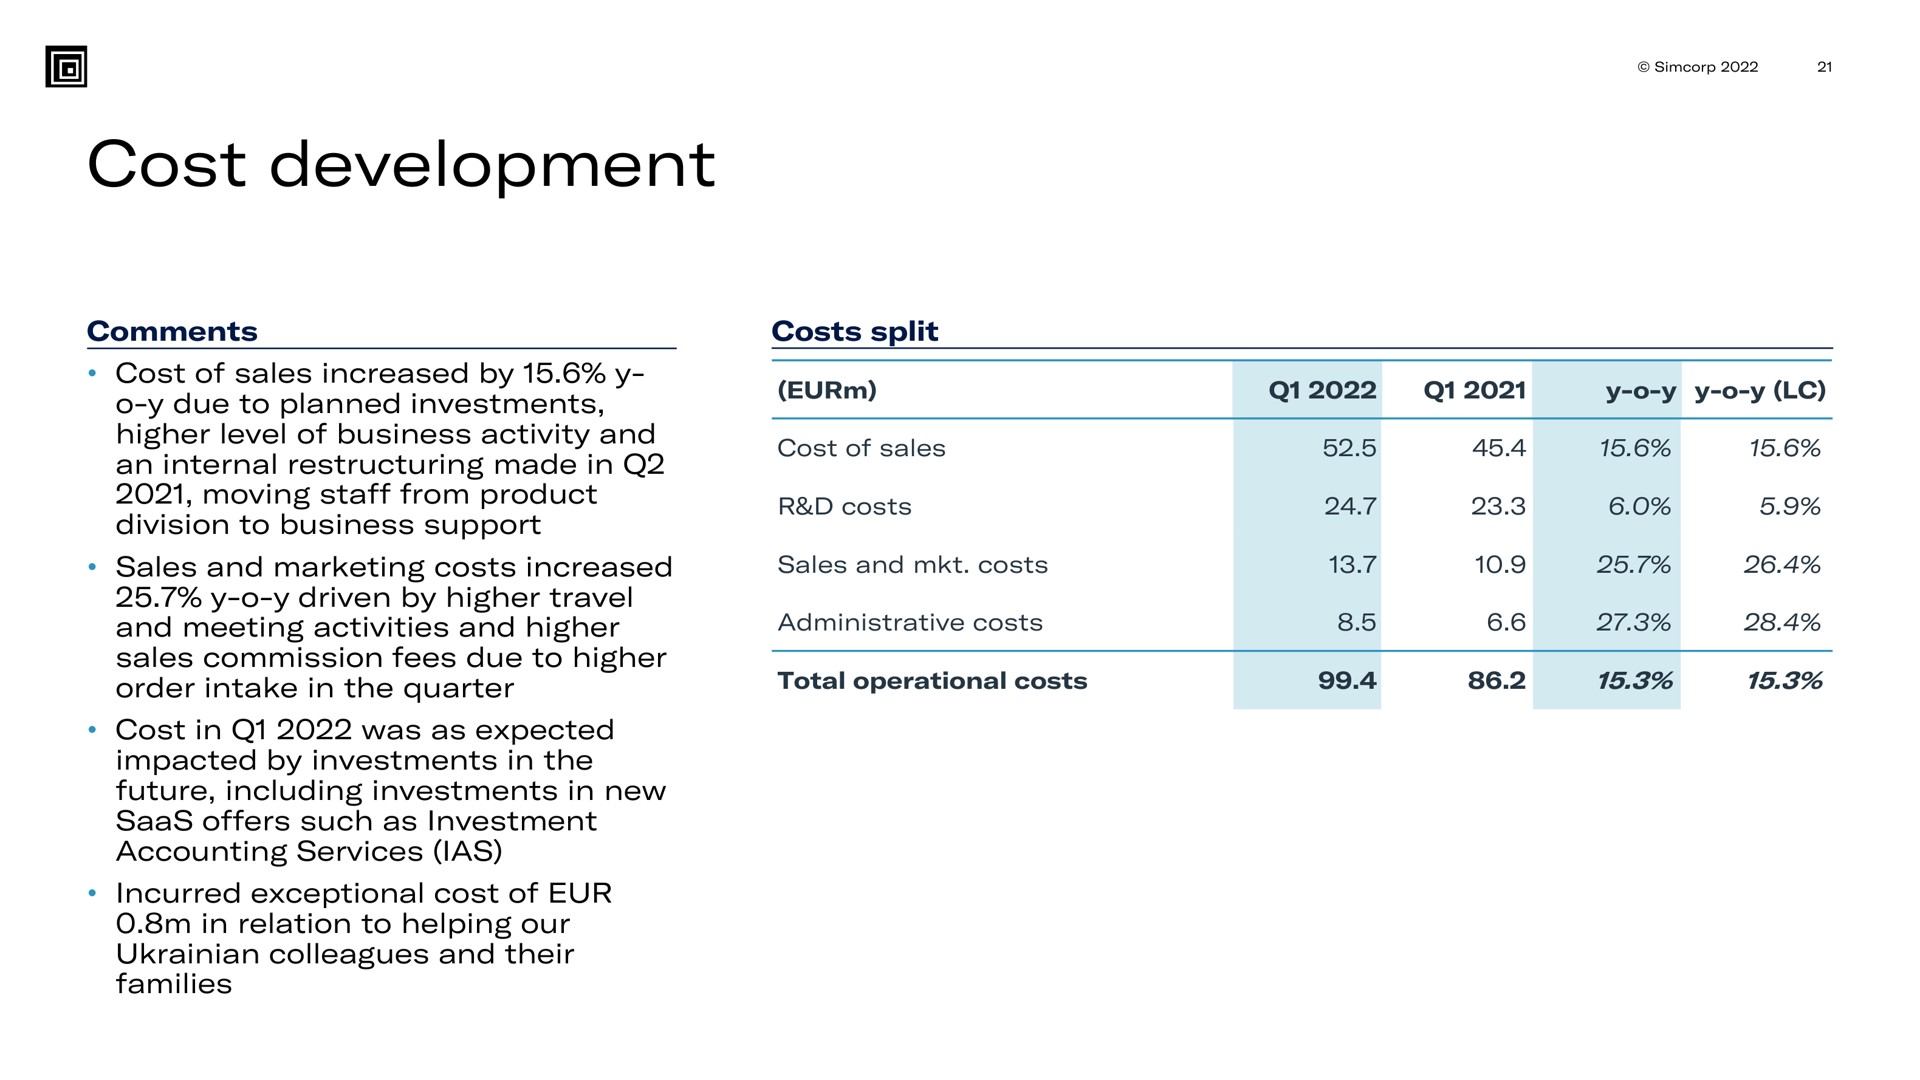 cost development due to planned investments | SimCorp